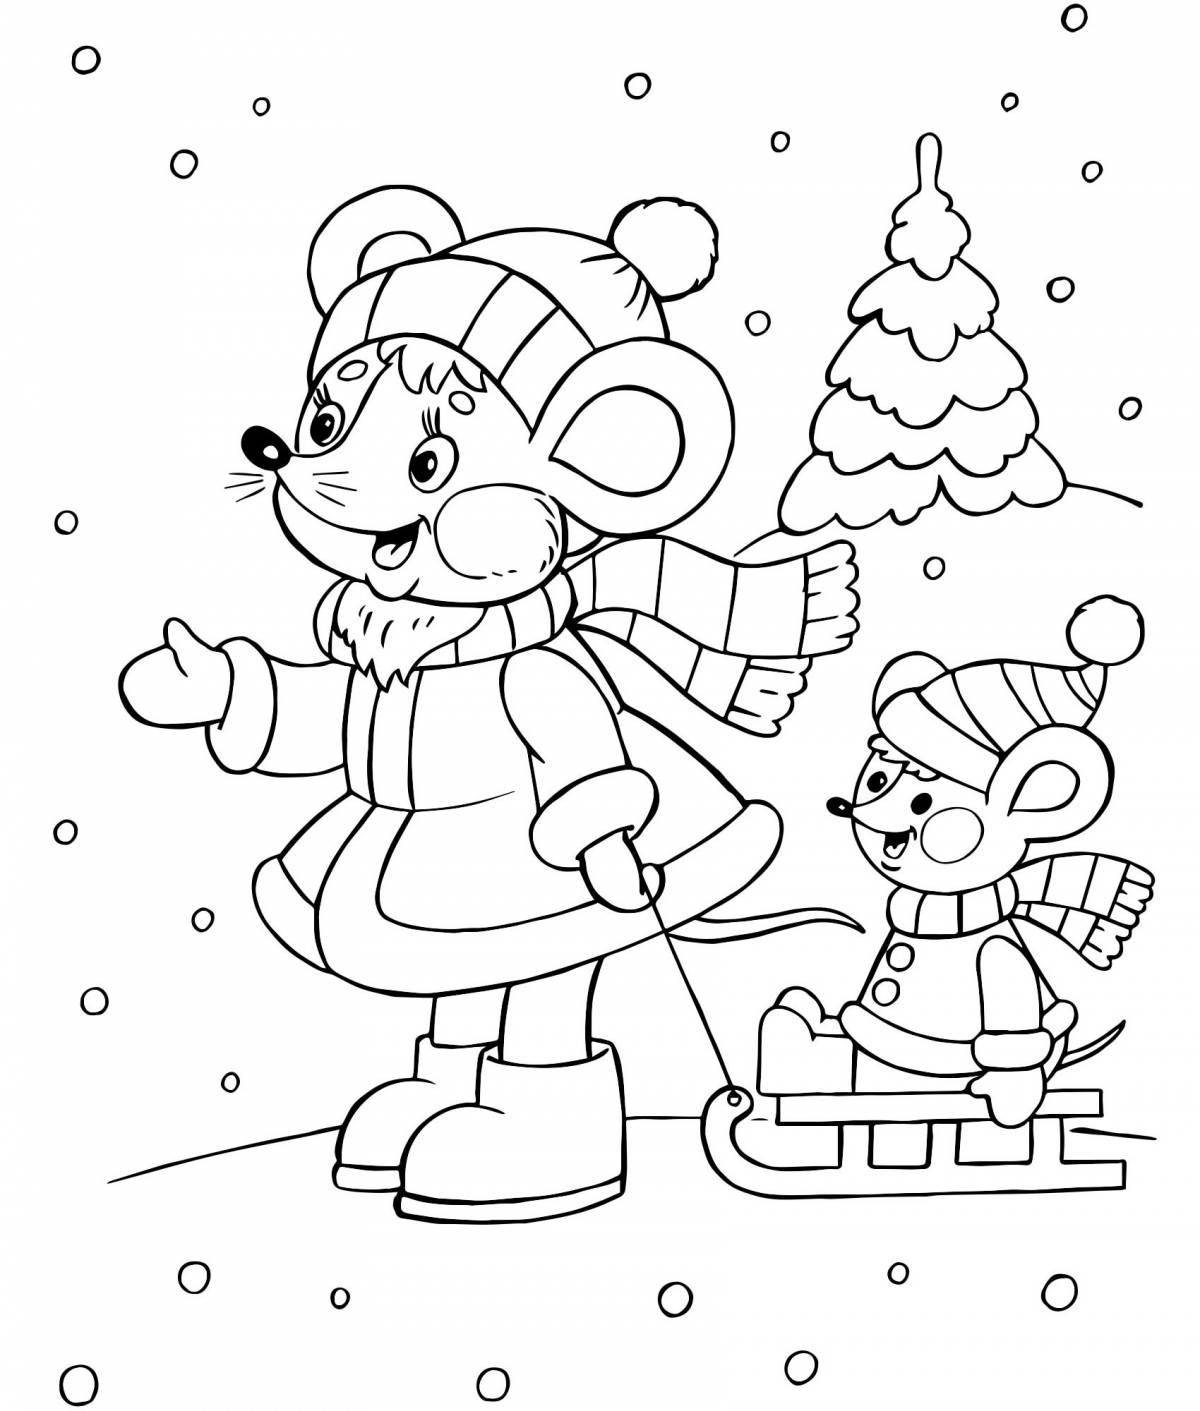 Children's glamorous winter coloring book